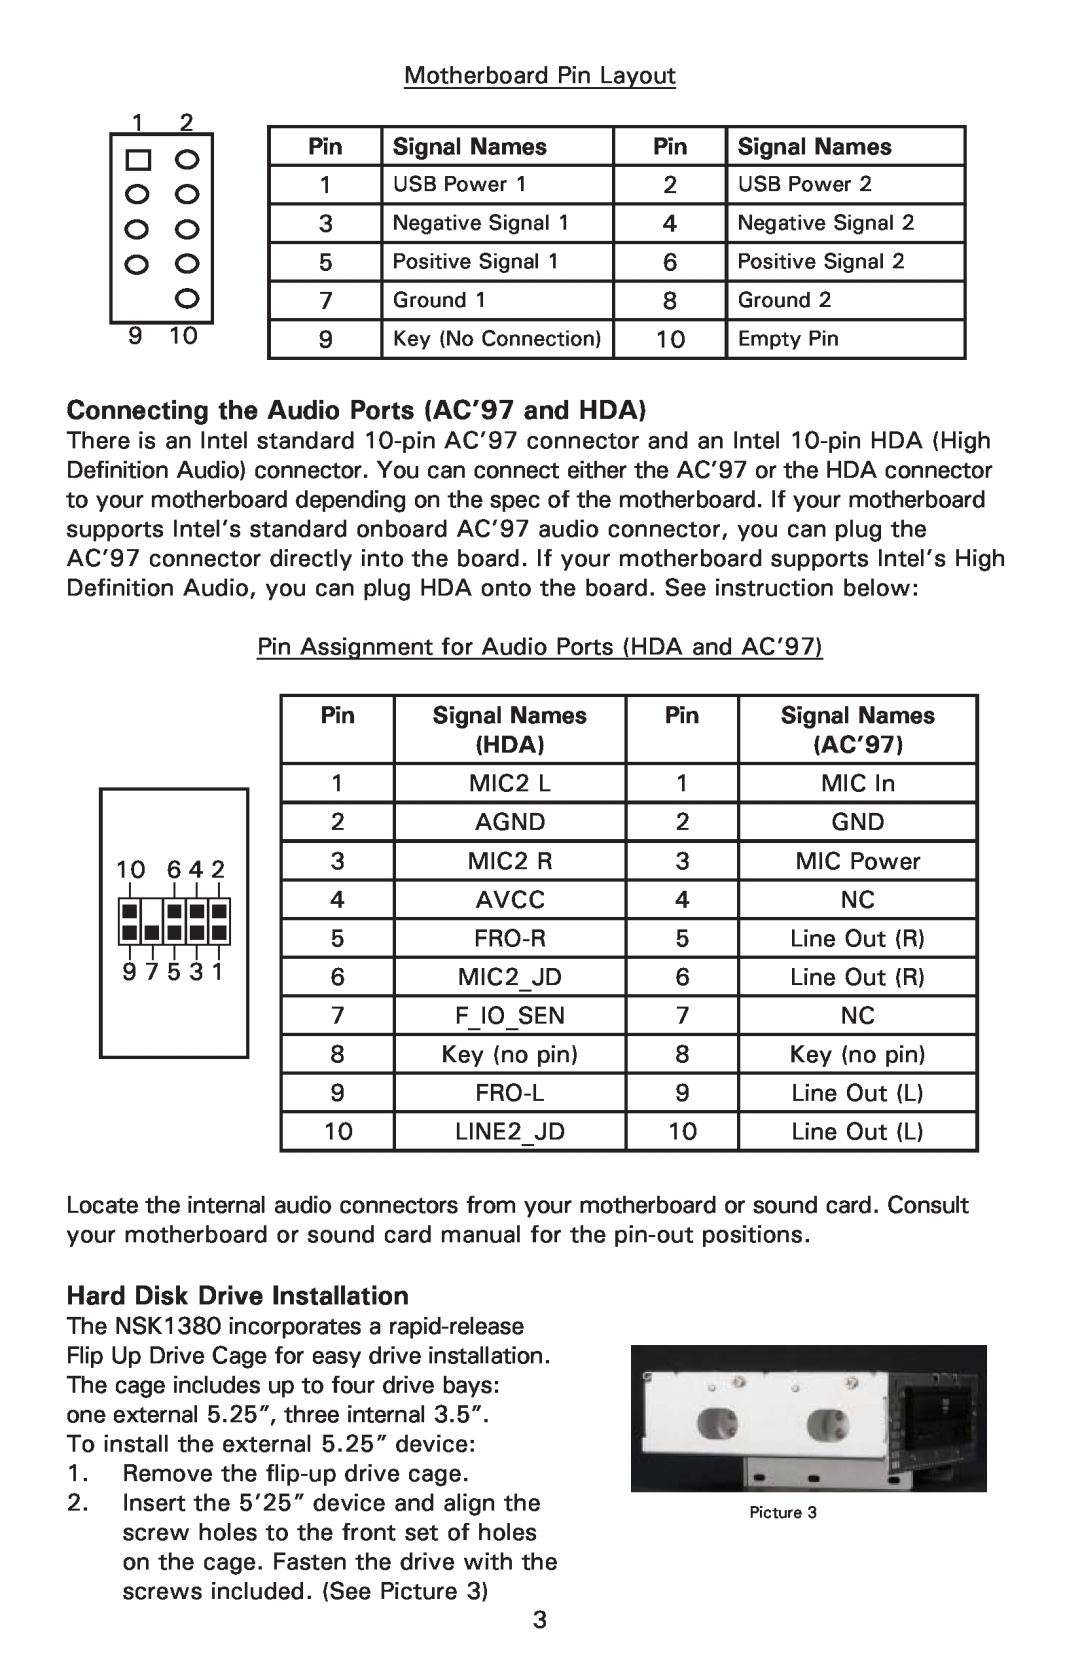 Antec NSK 1380 user manual Connecting the Audio Ports AC’97 and HDA, Hard Disk Drive Installation, Signal Names 